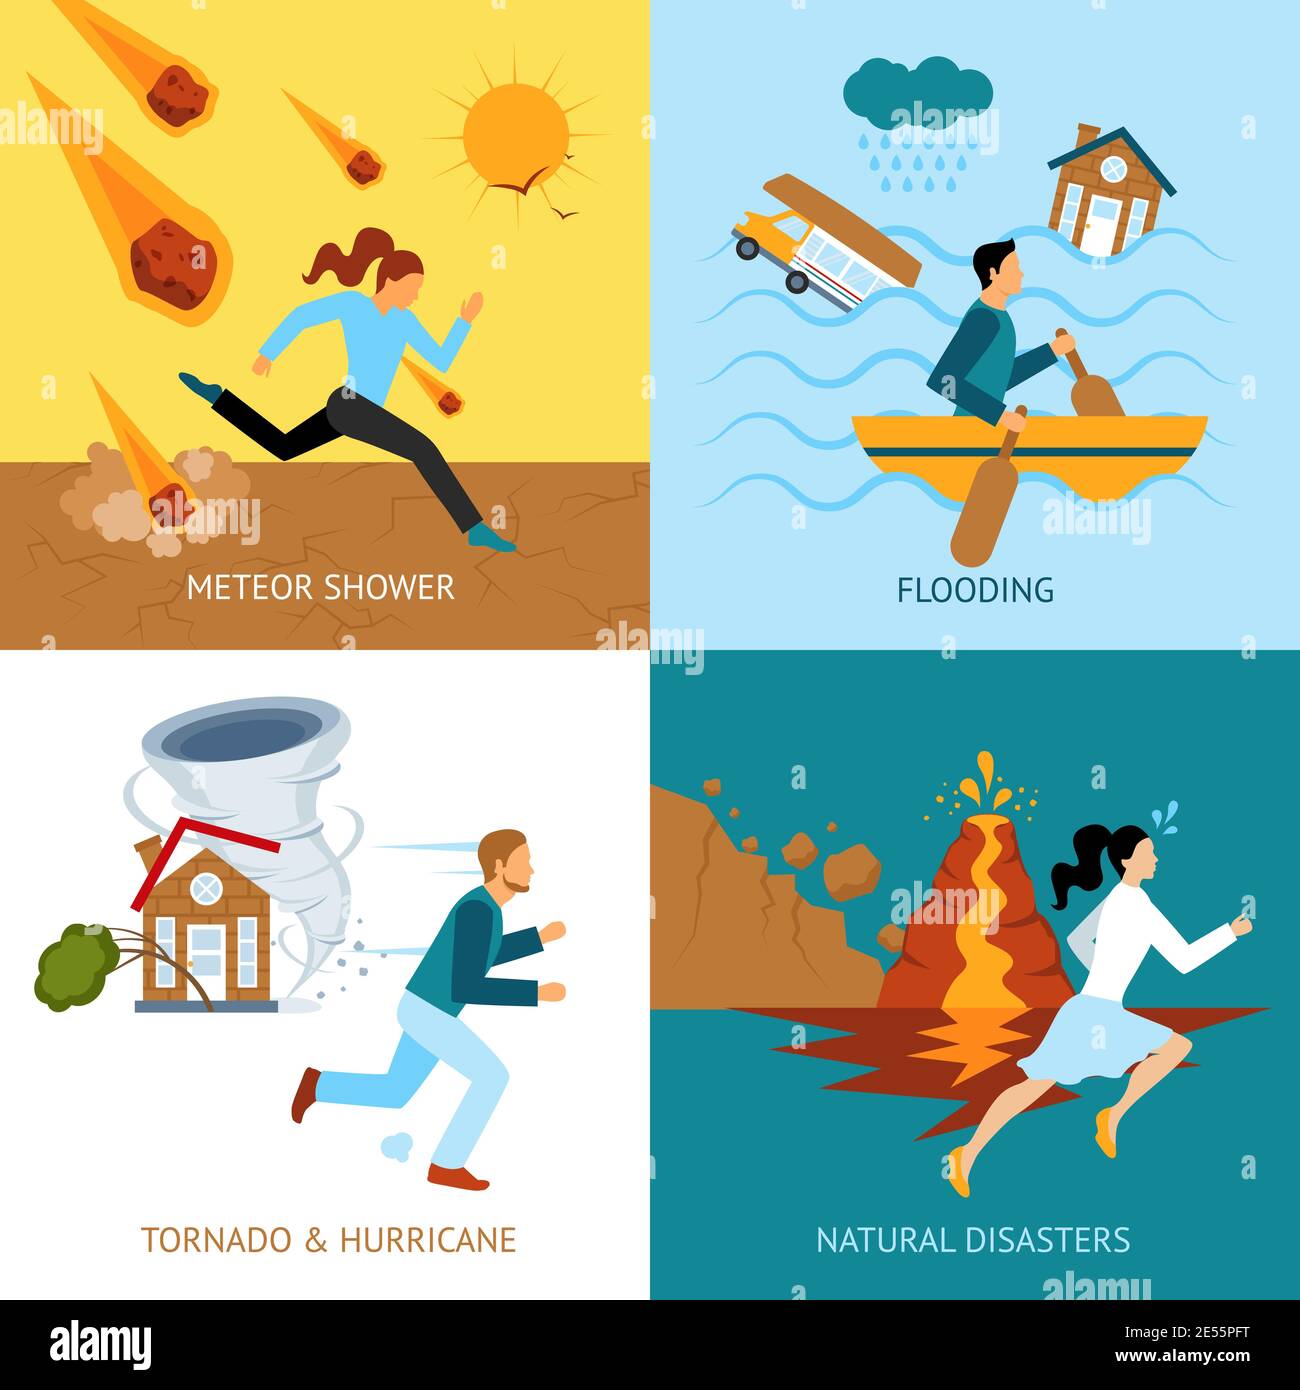 Natural Disasters Safety Design Concept With People Escape From Tornado And Hurricane Flat Icons 9359